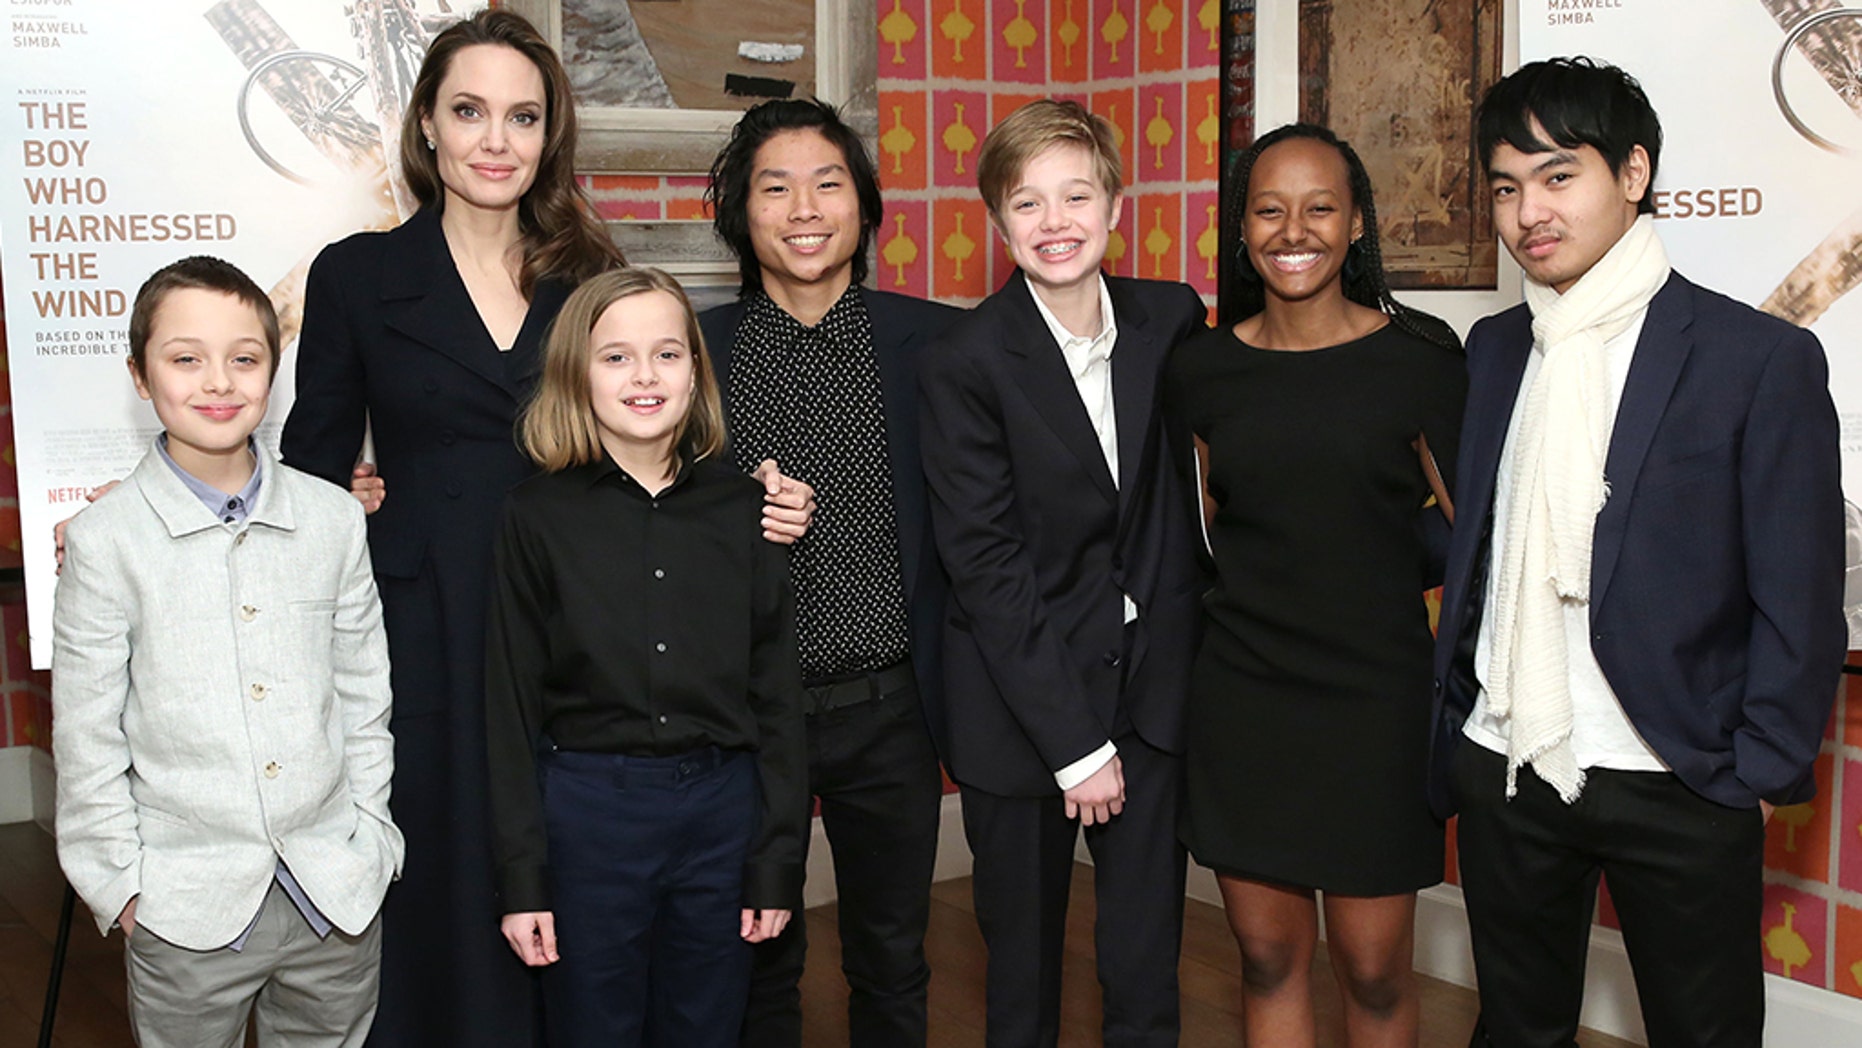 Angelina Jolie attends movie screening with all 6 'grown up' children | Fox News